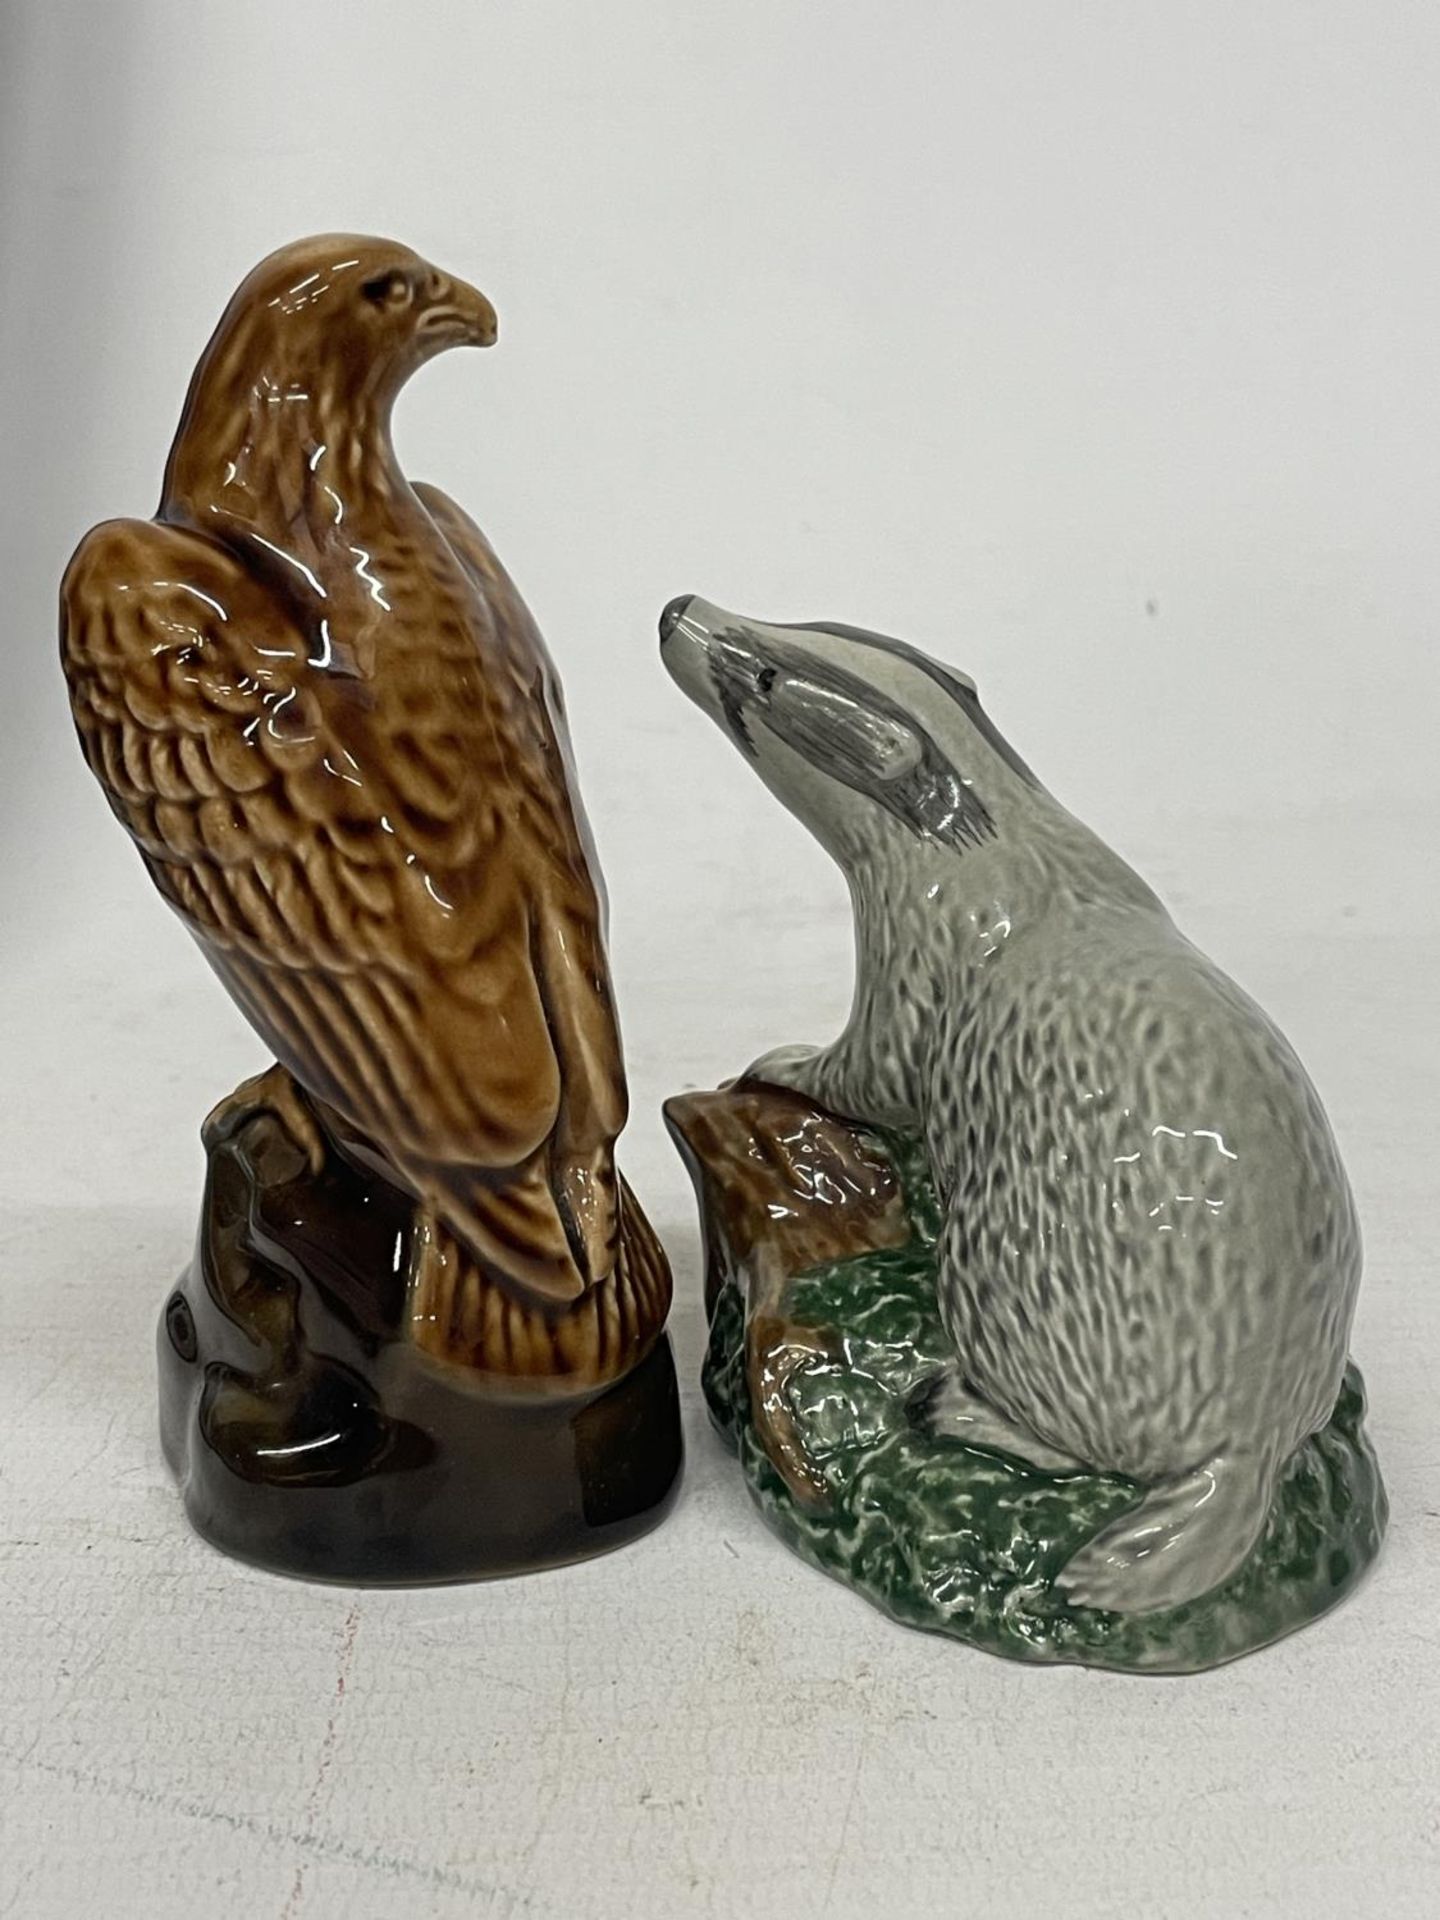 A BESWICK BENEAGLES MINIATURE SCOTCH WHISKEY EAGLE TOGETHER WITH A BADGER - Image 3 of 4